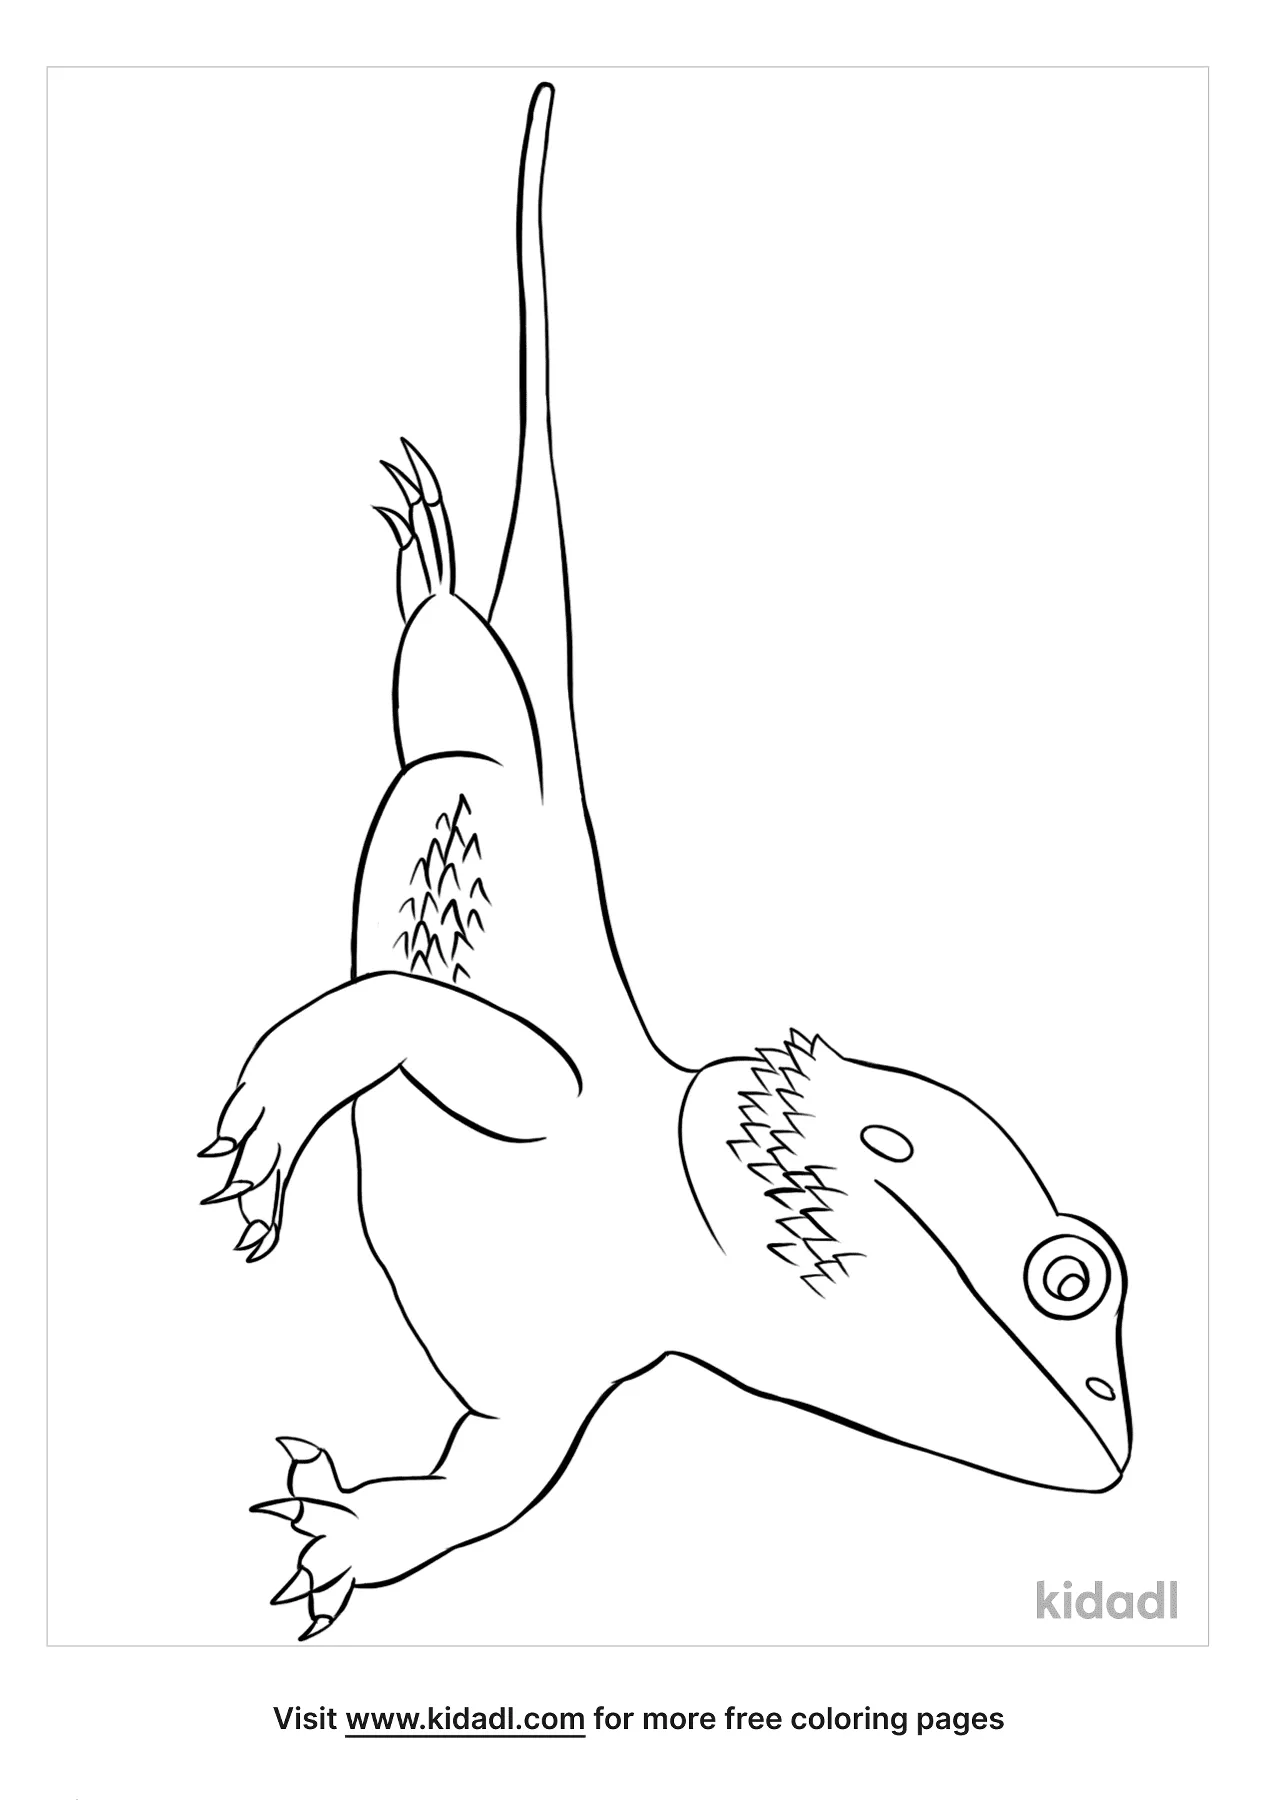 √ Bearded Dragon Coloring Page / Bearded Dragon Zentangle - Realistic